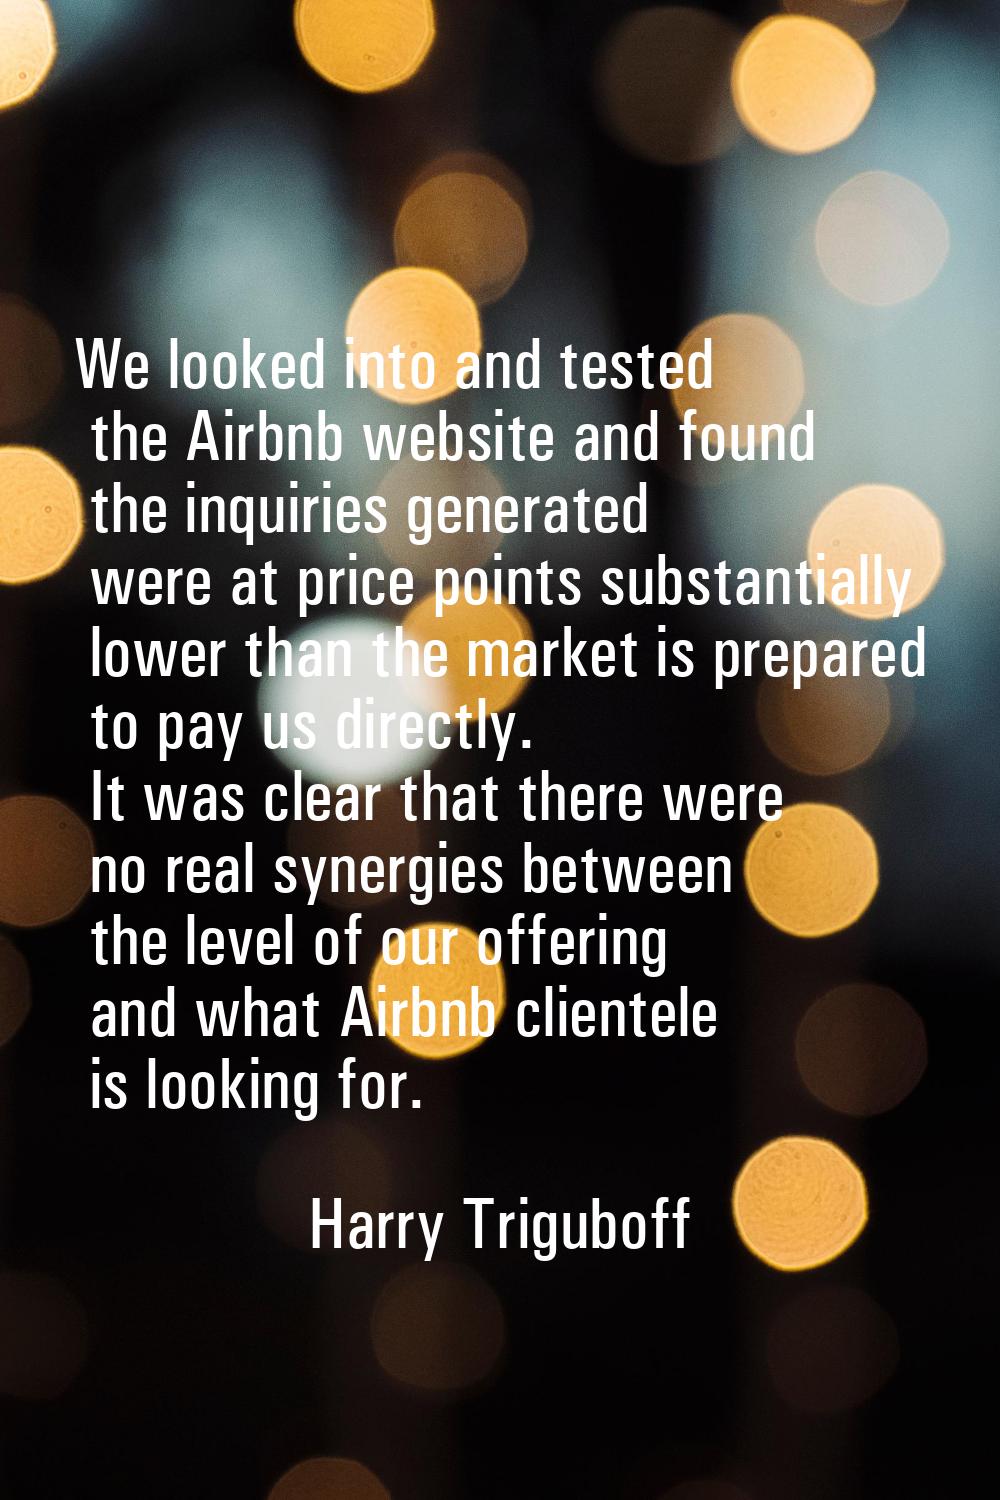 We looked into and tested the Airbnb website and found the inquiries generated were at price points